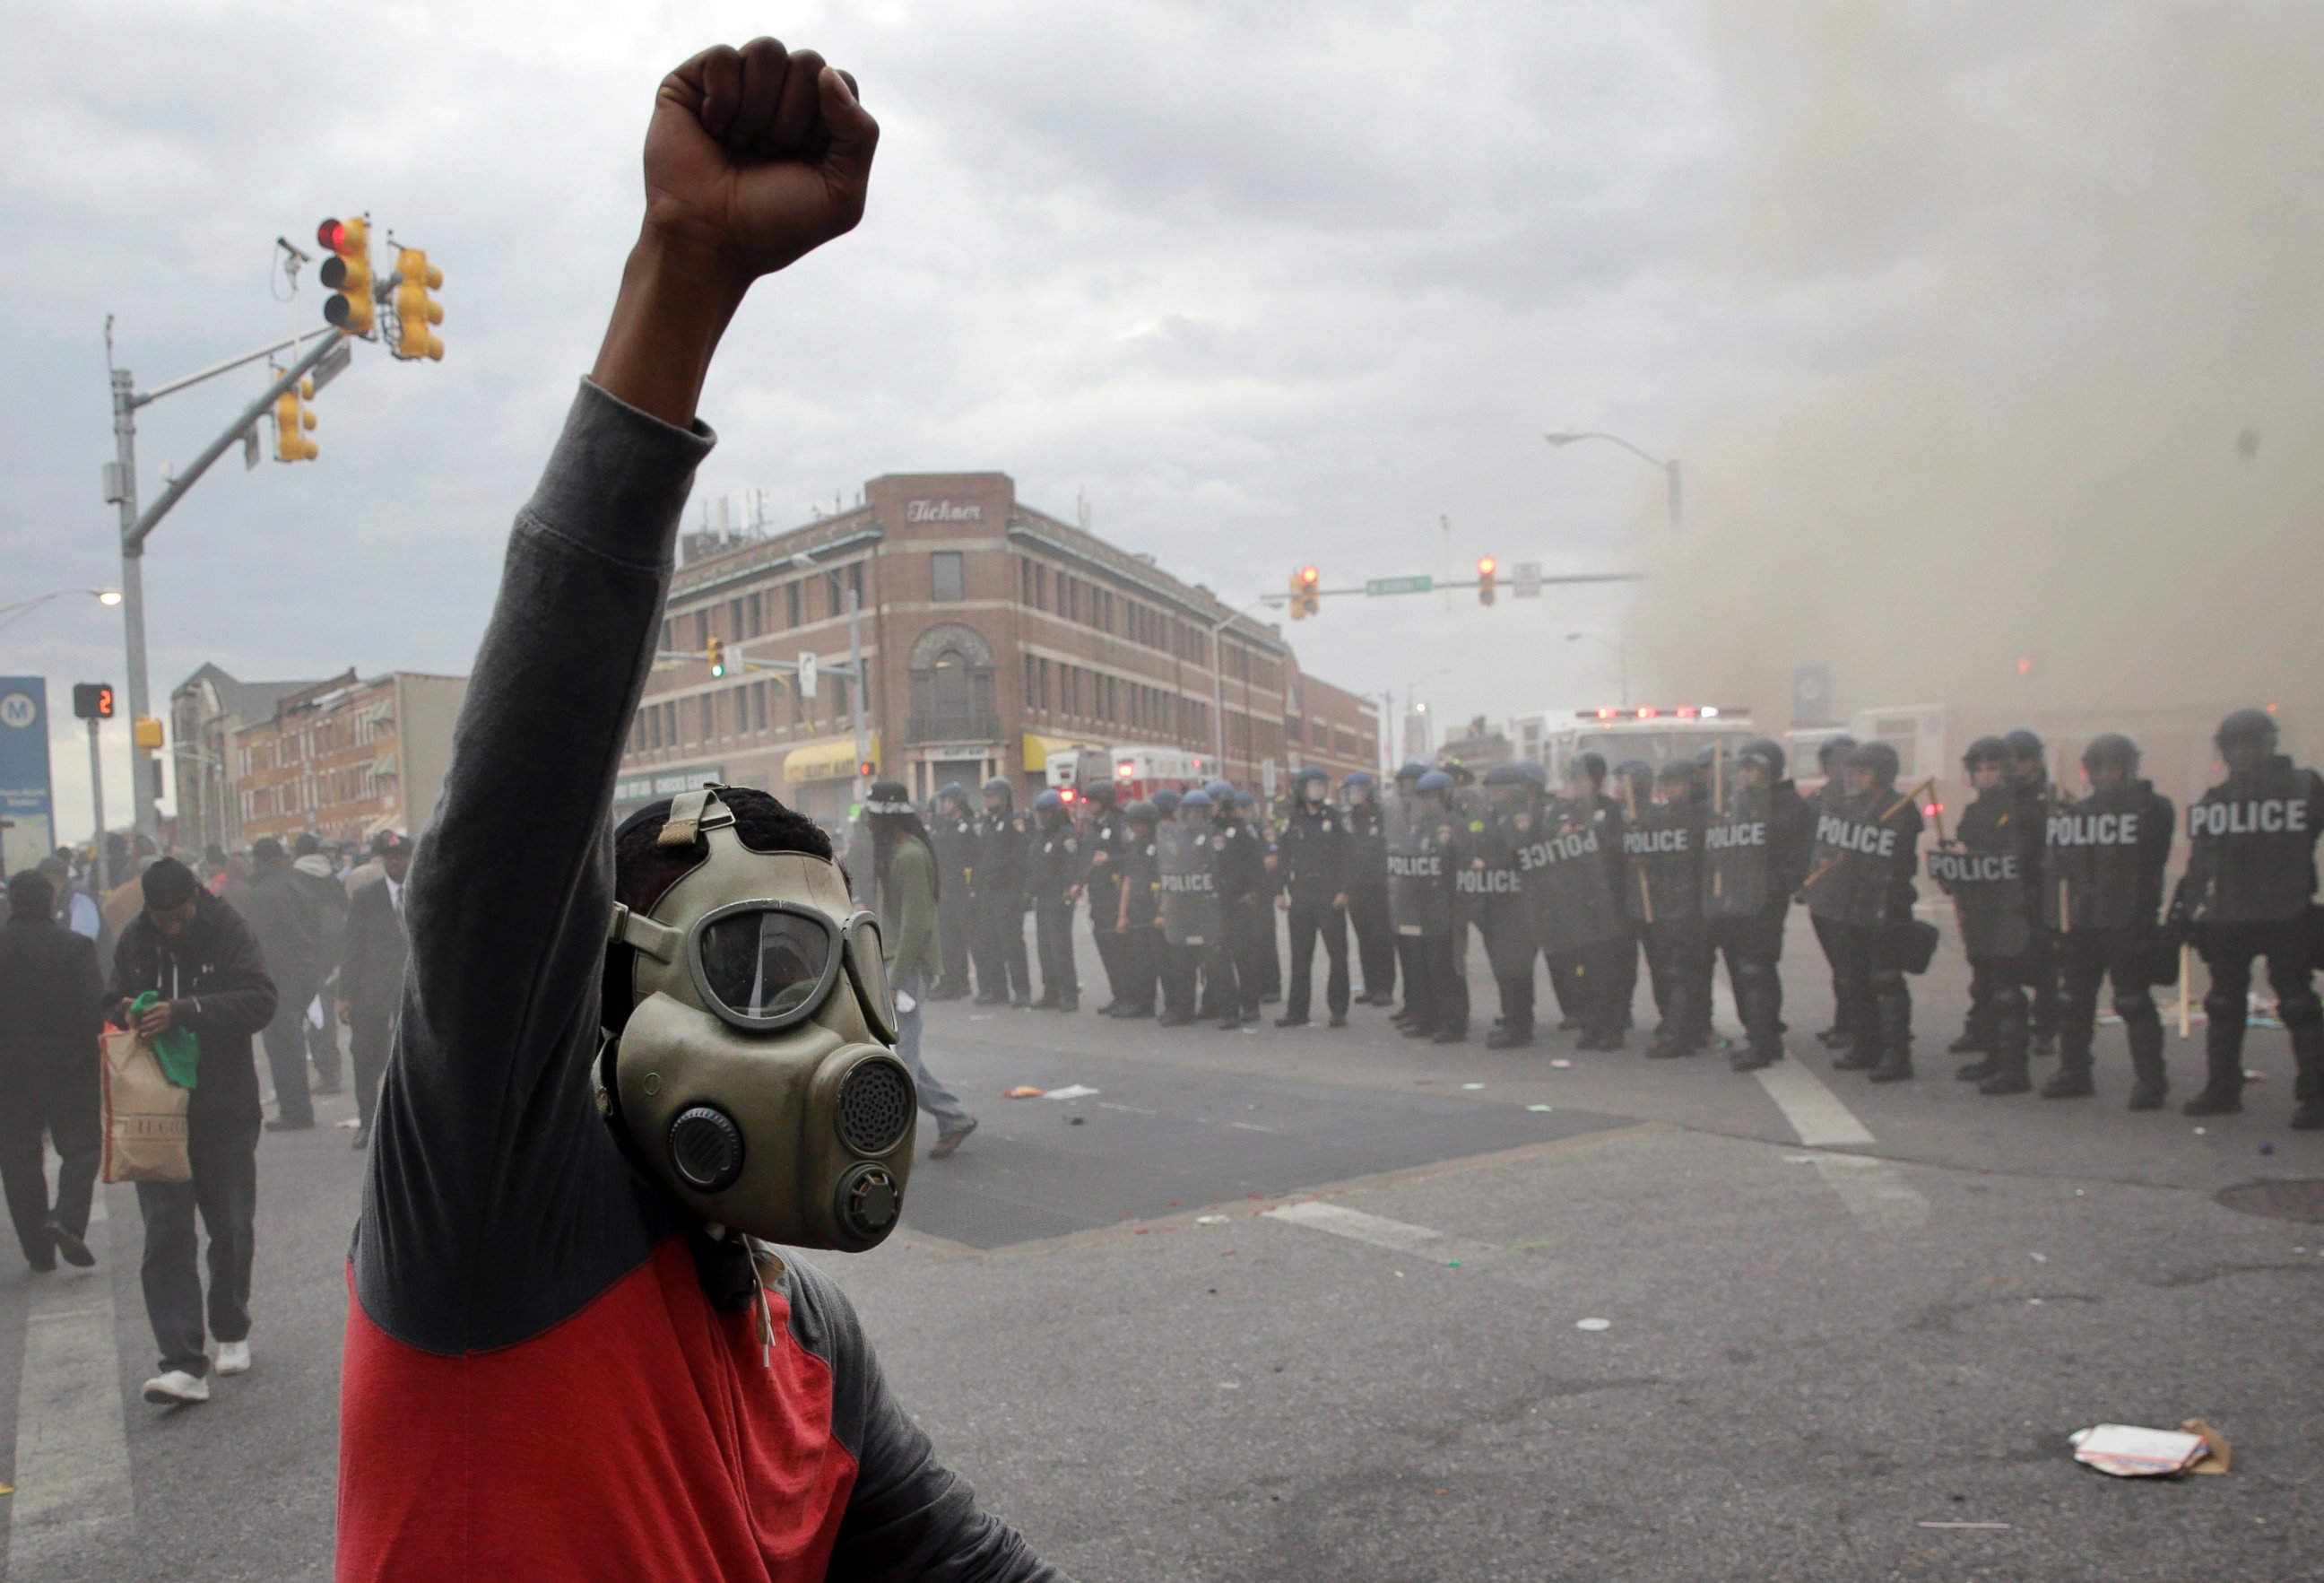 PHOTO: A demonstrator raises his fist as police stand in formation as a store burns, April 27, 2015, in Baltimore.